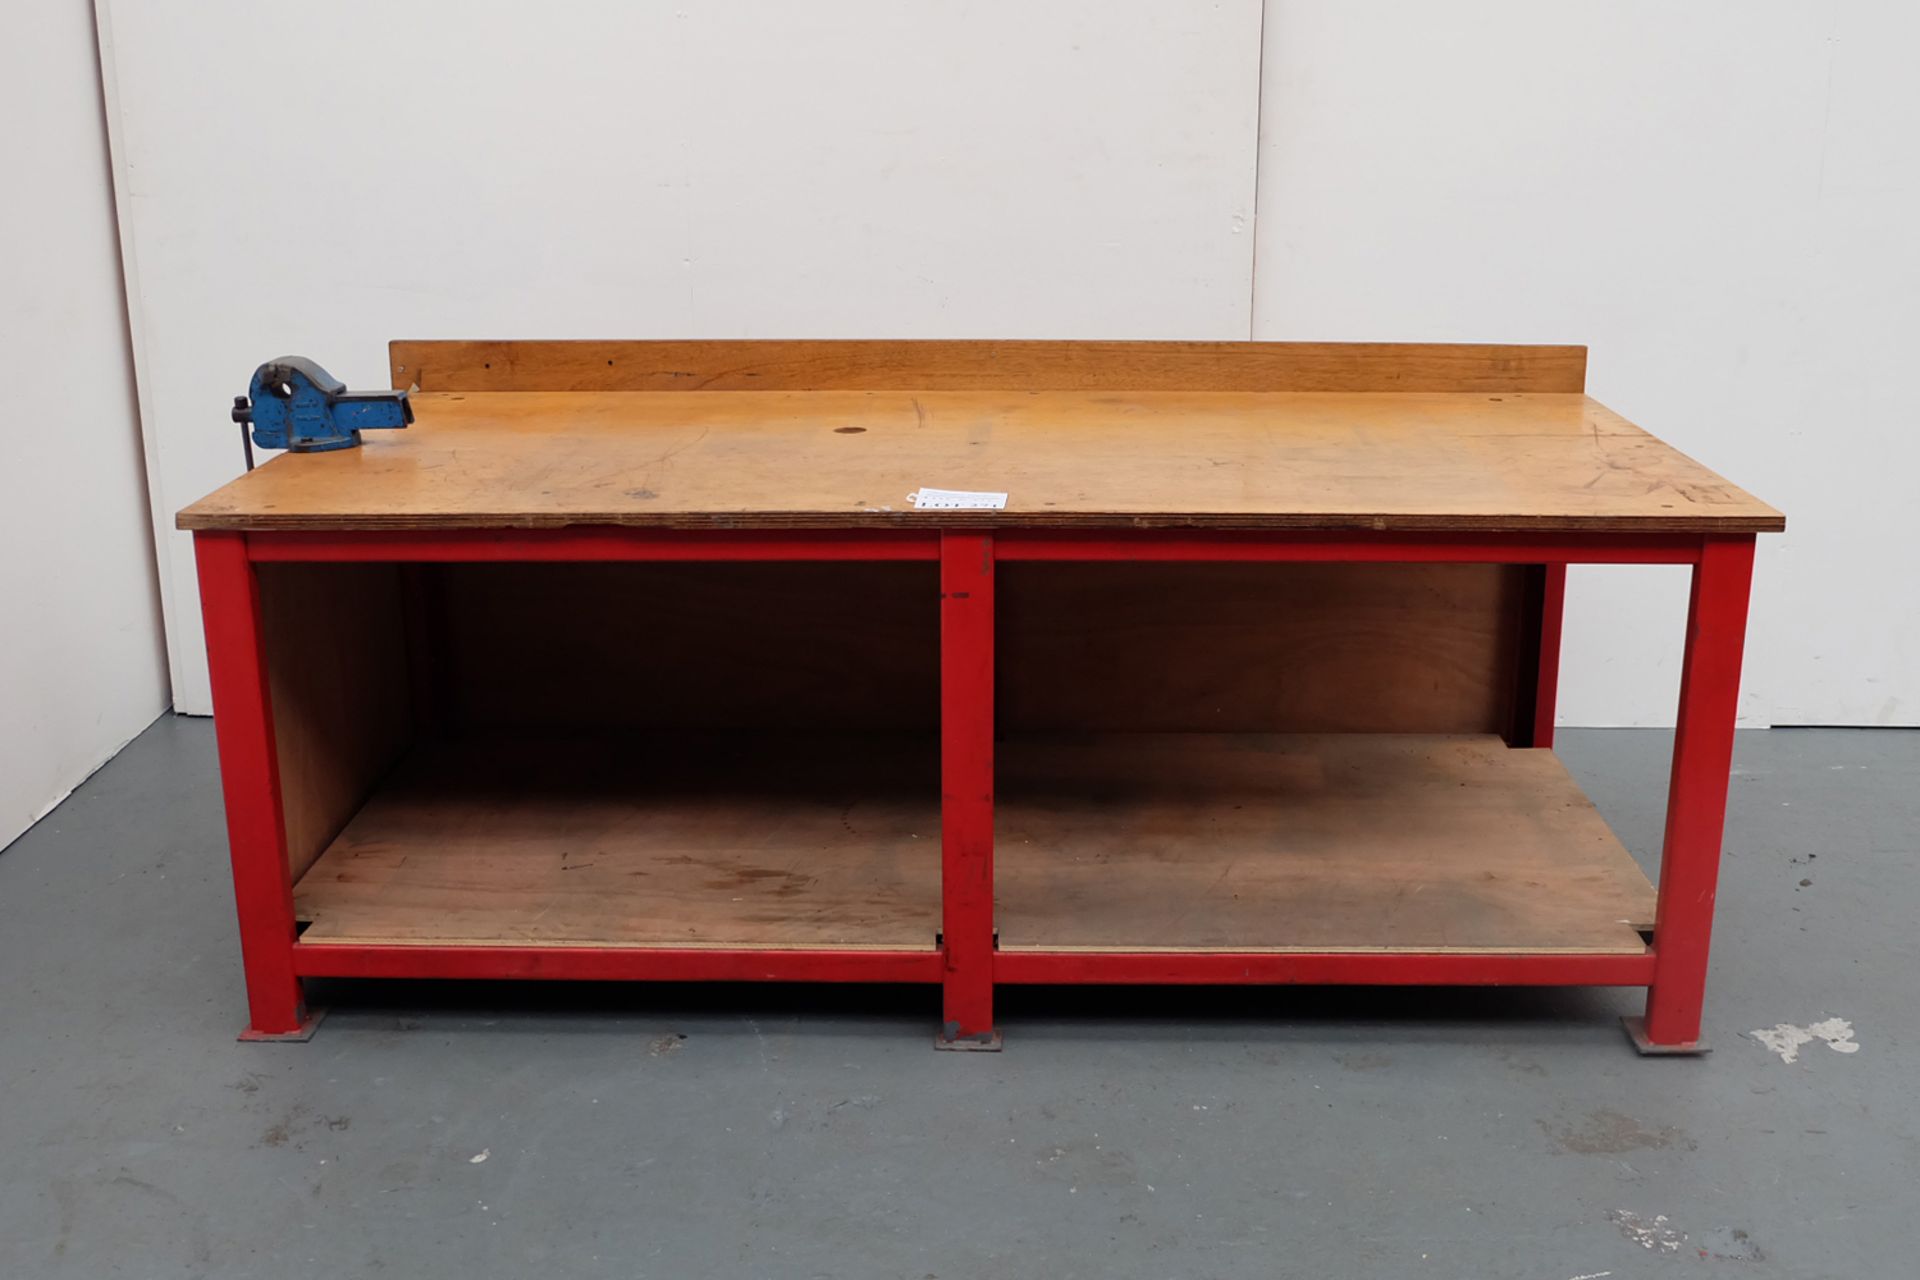 Heavy Duty Table with a 3 1/2" Bench Vice. Approx Dimensions 2300mm x 1020mm x 850mm Working Height